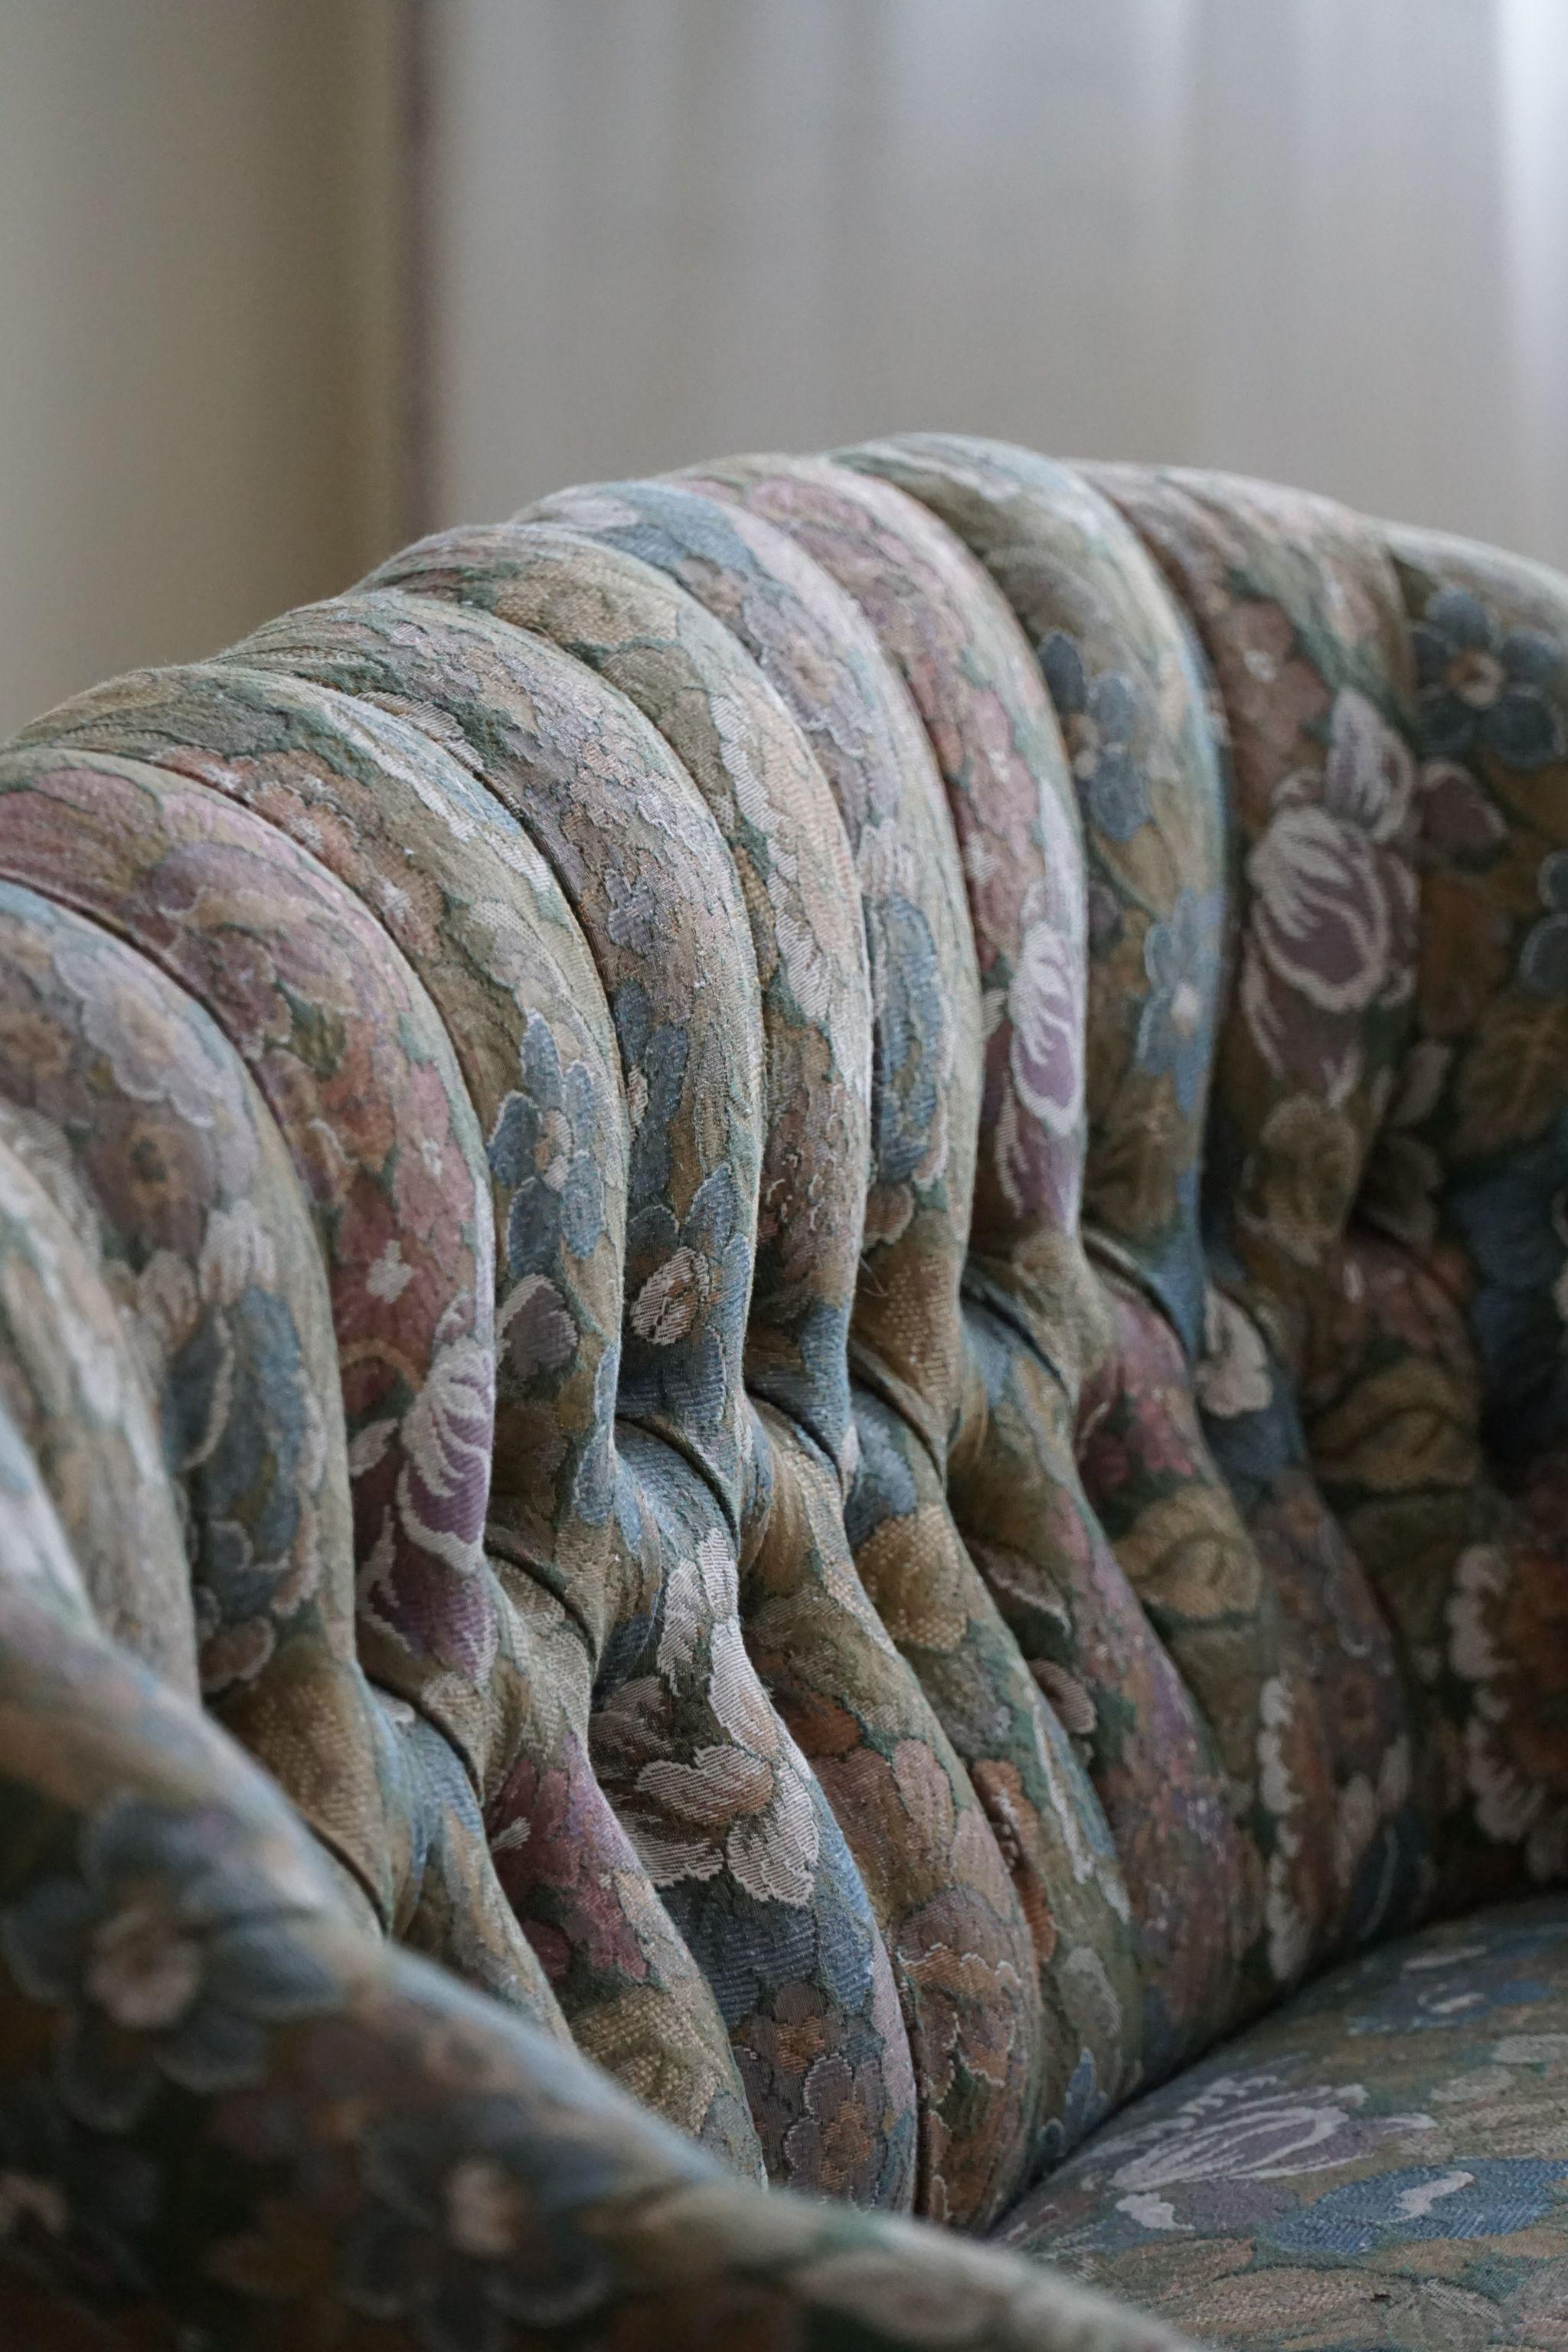 Hand-Crafted Antique Curved Sofa with Flora Fabric, By a Danish Cabinetmaker, Early 1900s